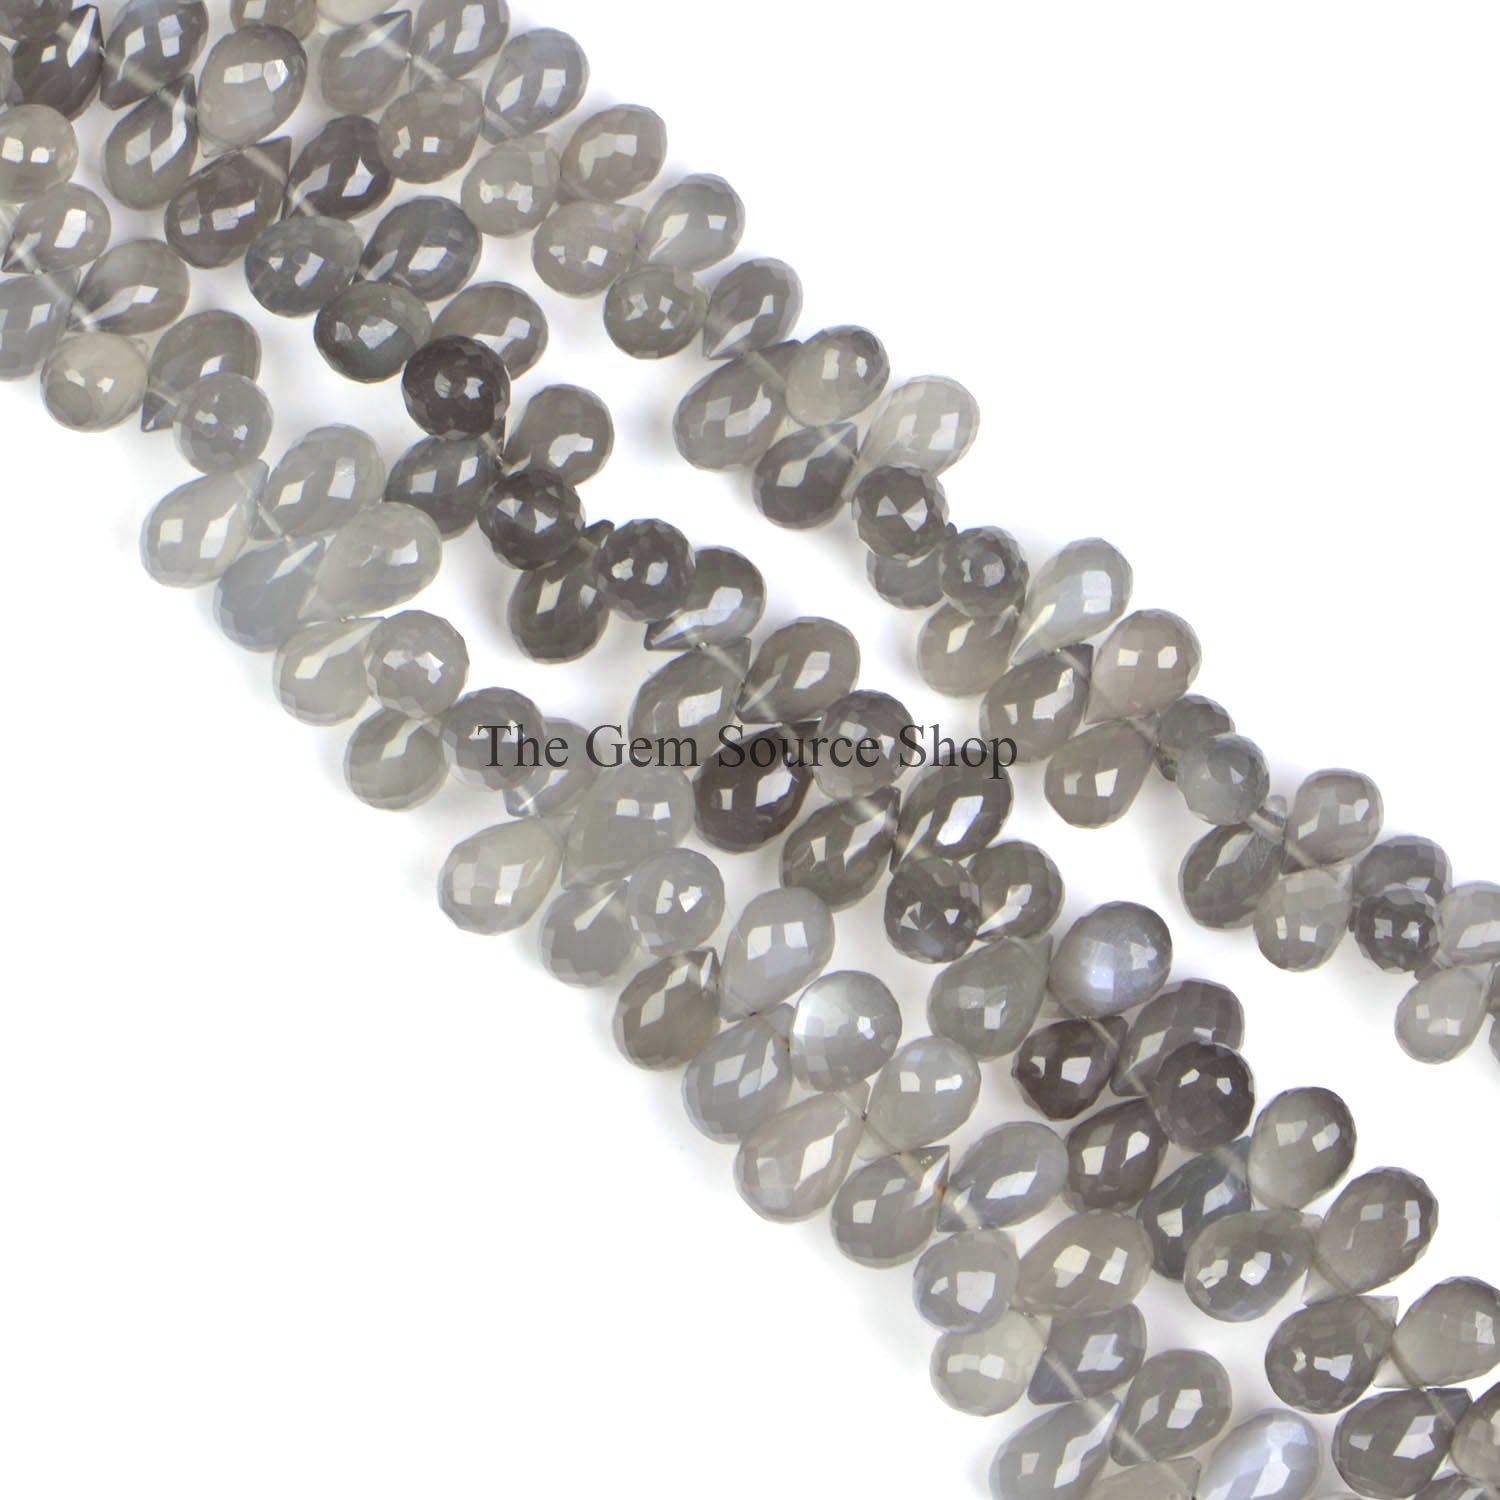 Grey Moonstone Beads, Moonstone Faceted Beads, Moonstone Drop Shape Beads, Side Drill Drop Beads